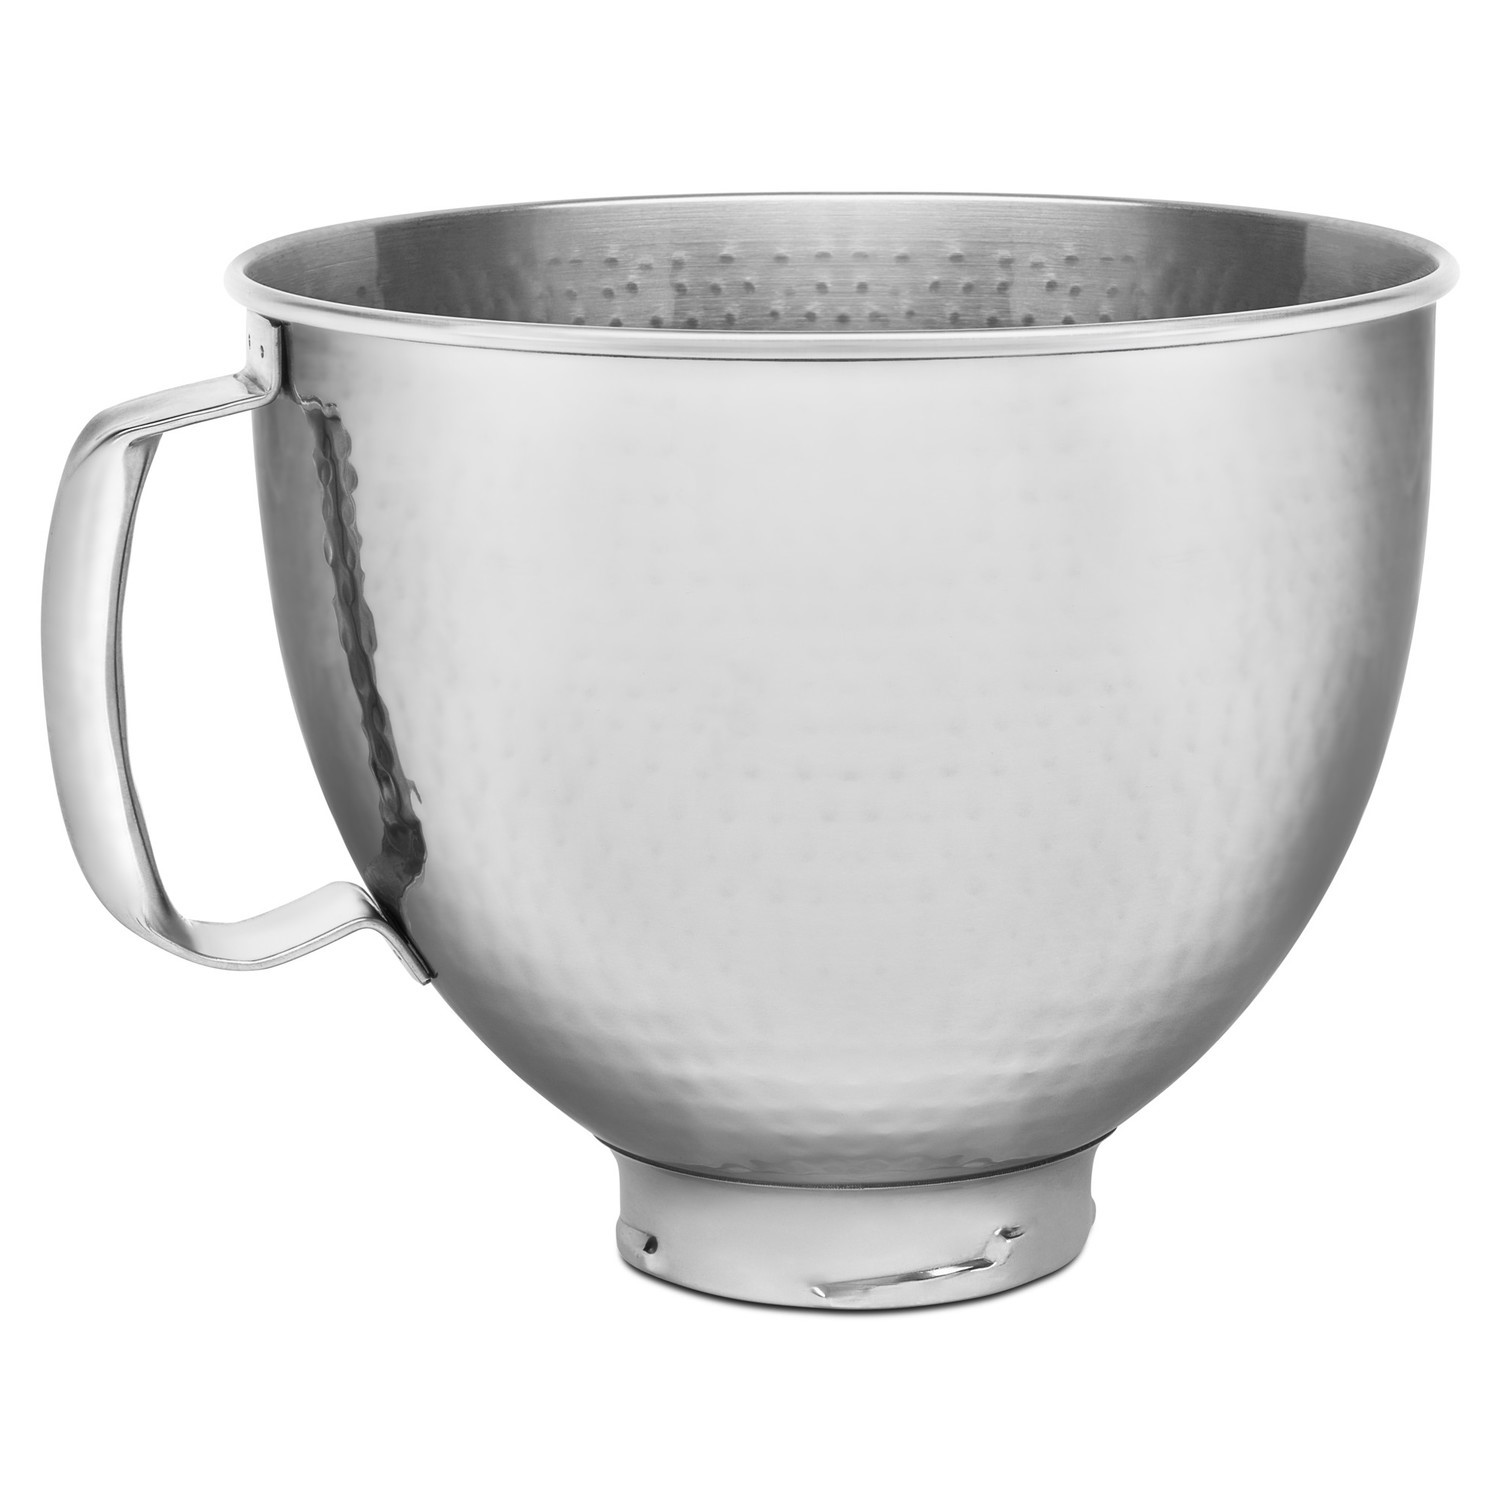 KitchenAid Stainless Steel Hammered Mixing Bowl